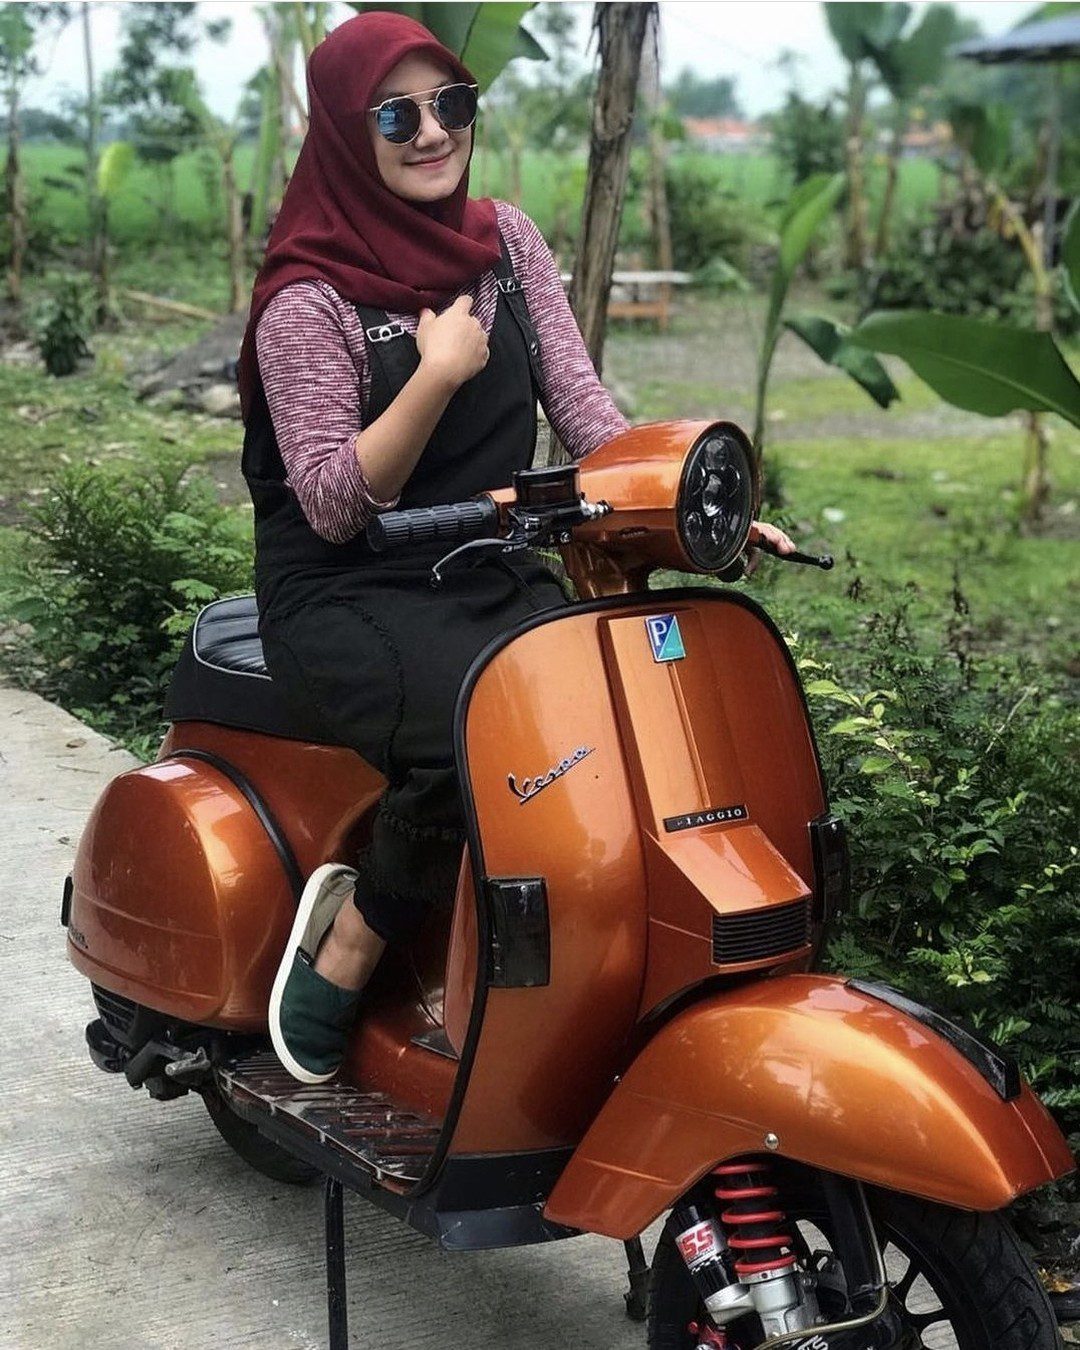 Orange Vespa PX custom modified 

Order Vespa genuine wheel from official dealer
Contact Wa 0819-04-595959
Cek photos in highlight @vesparkindo 

hashtag and mention @vespapxnet for feature repost
Check website www.vespapx.net for more 

@bloeedanielz